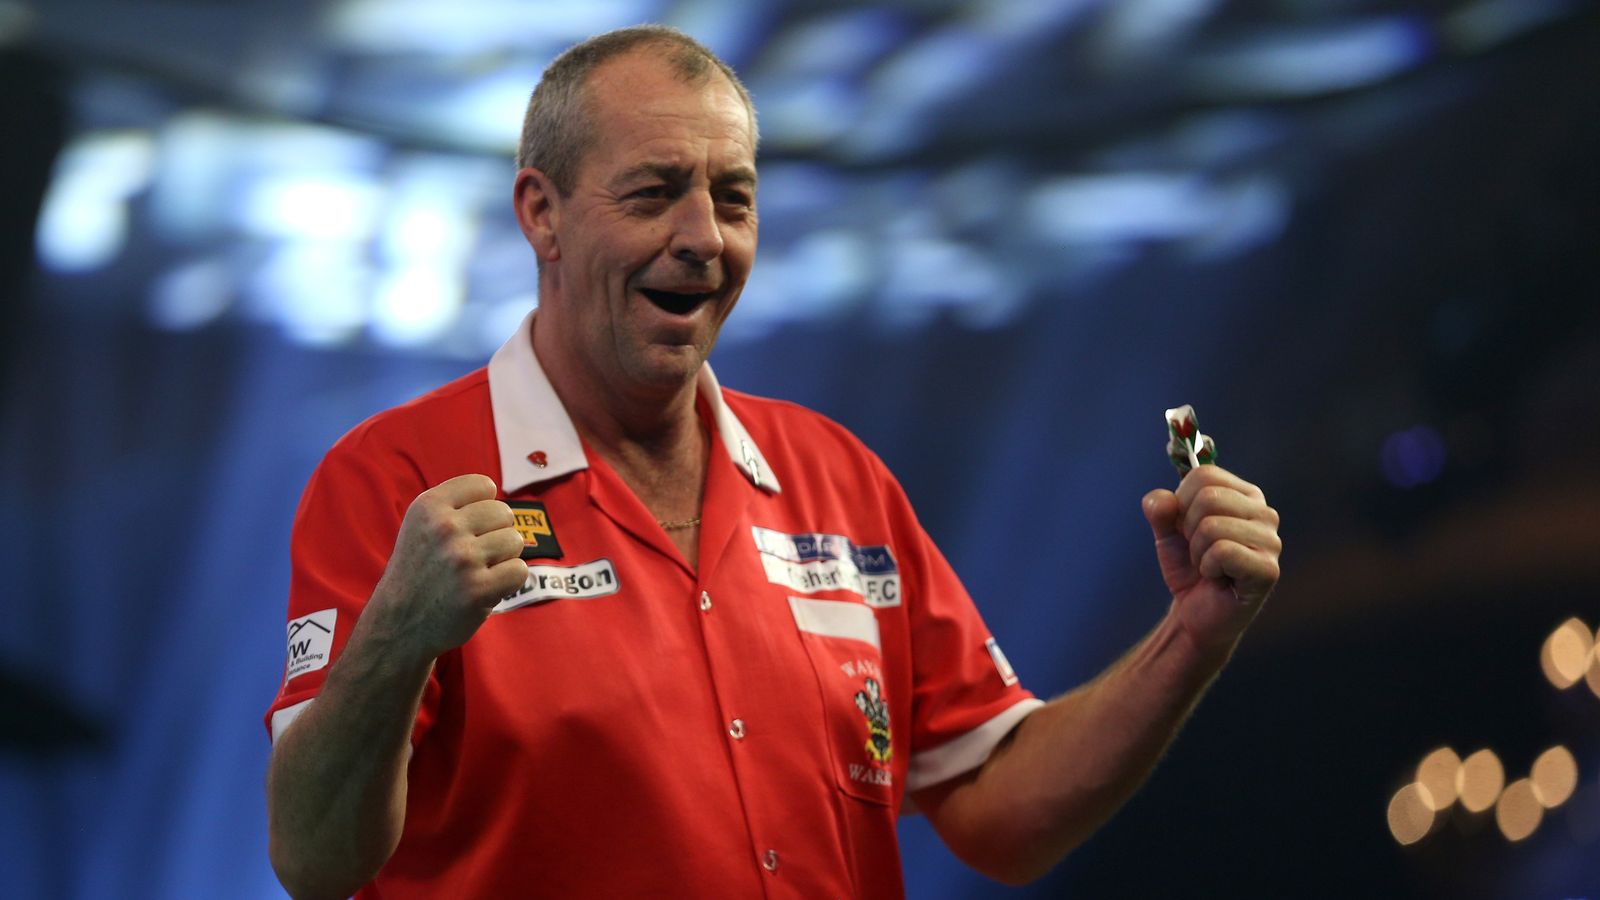 Online Darts Live League Week 8 Fixtures, Results and How to Watch